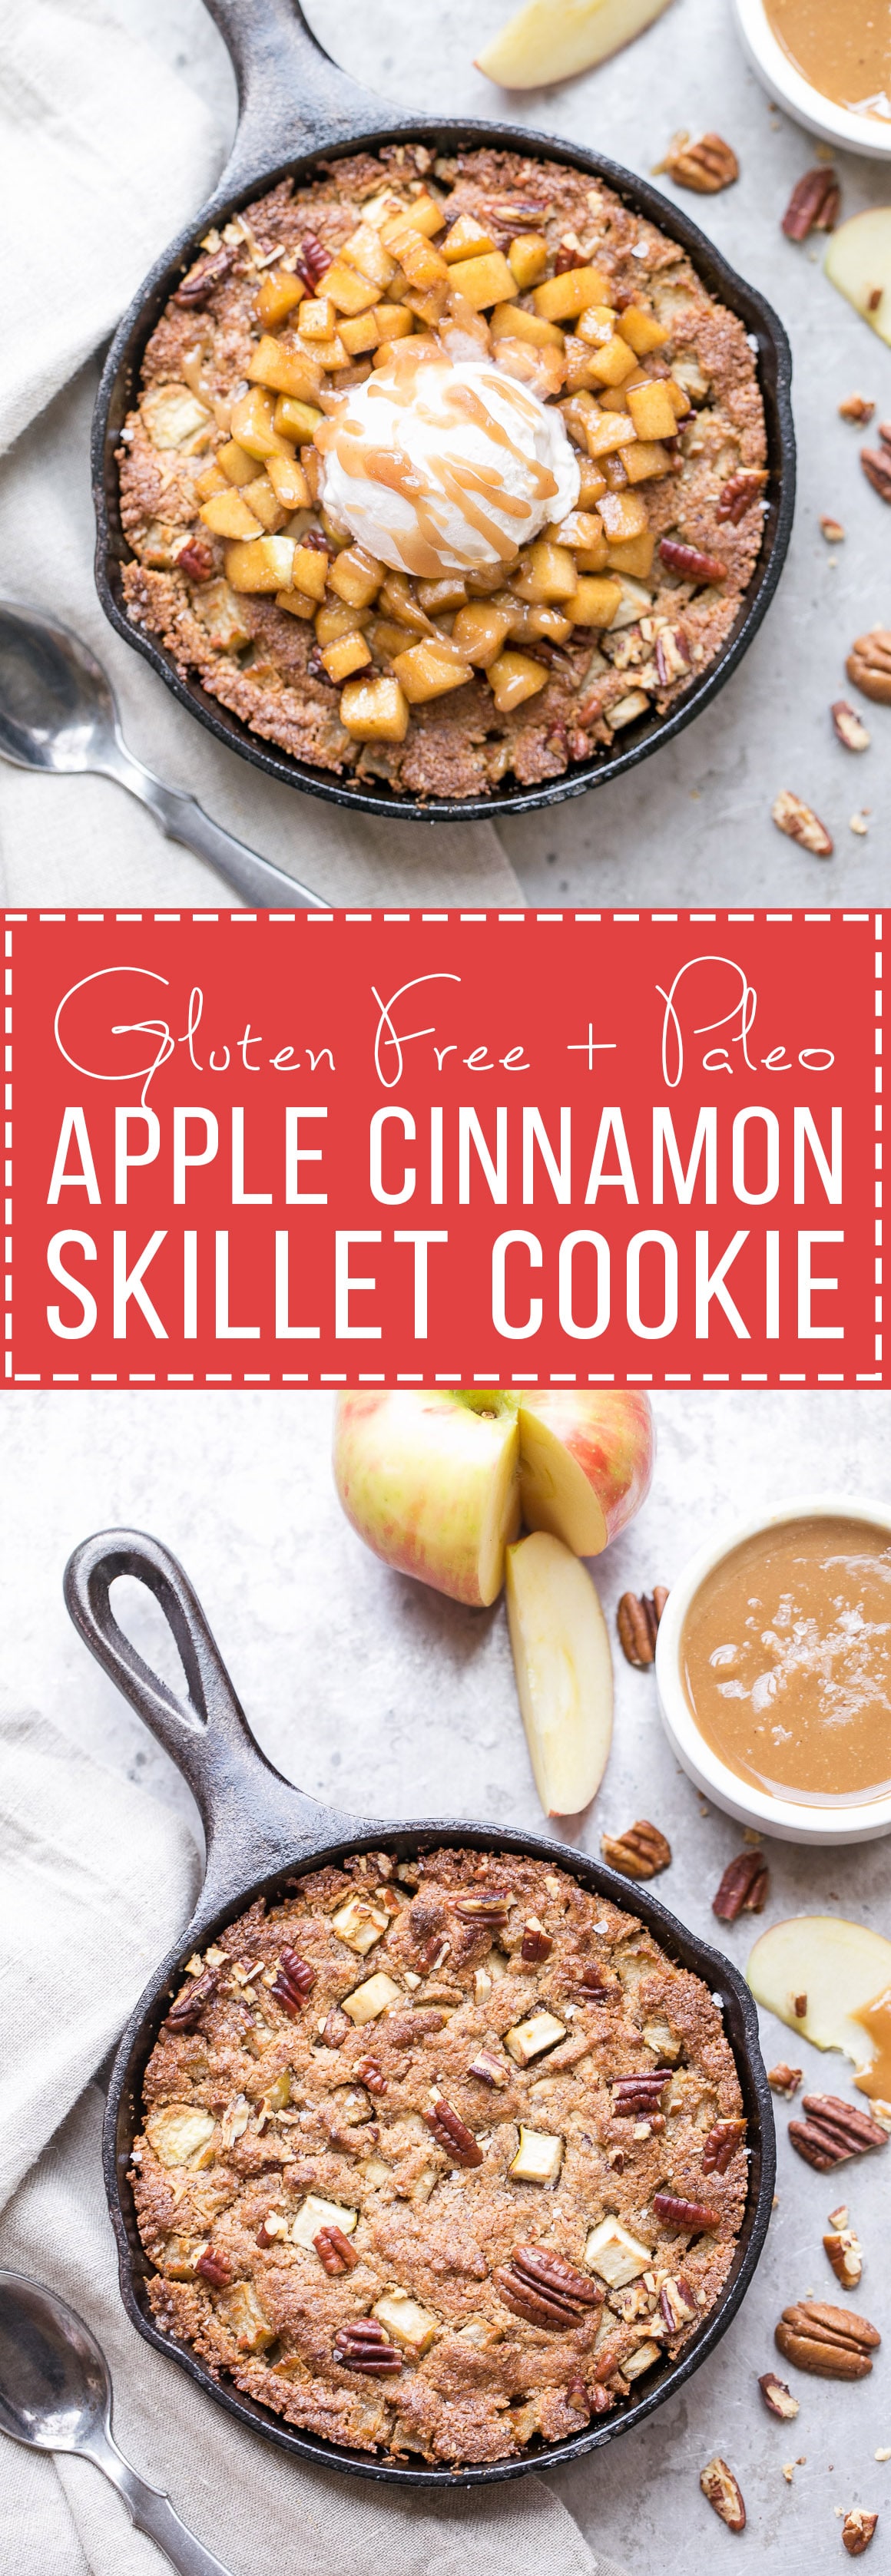 This Apple Cinnamon Skillet Cookie is a deep-dish spiced cookie that's loaded with fresh diced apples and warm fall spices! This gluten-free, refined sugar-free, and Paleo-friendly skillet cookie is topped with caramelized apples.